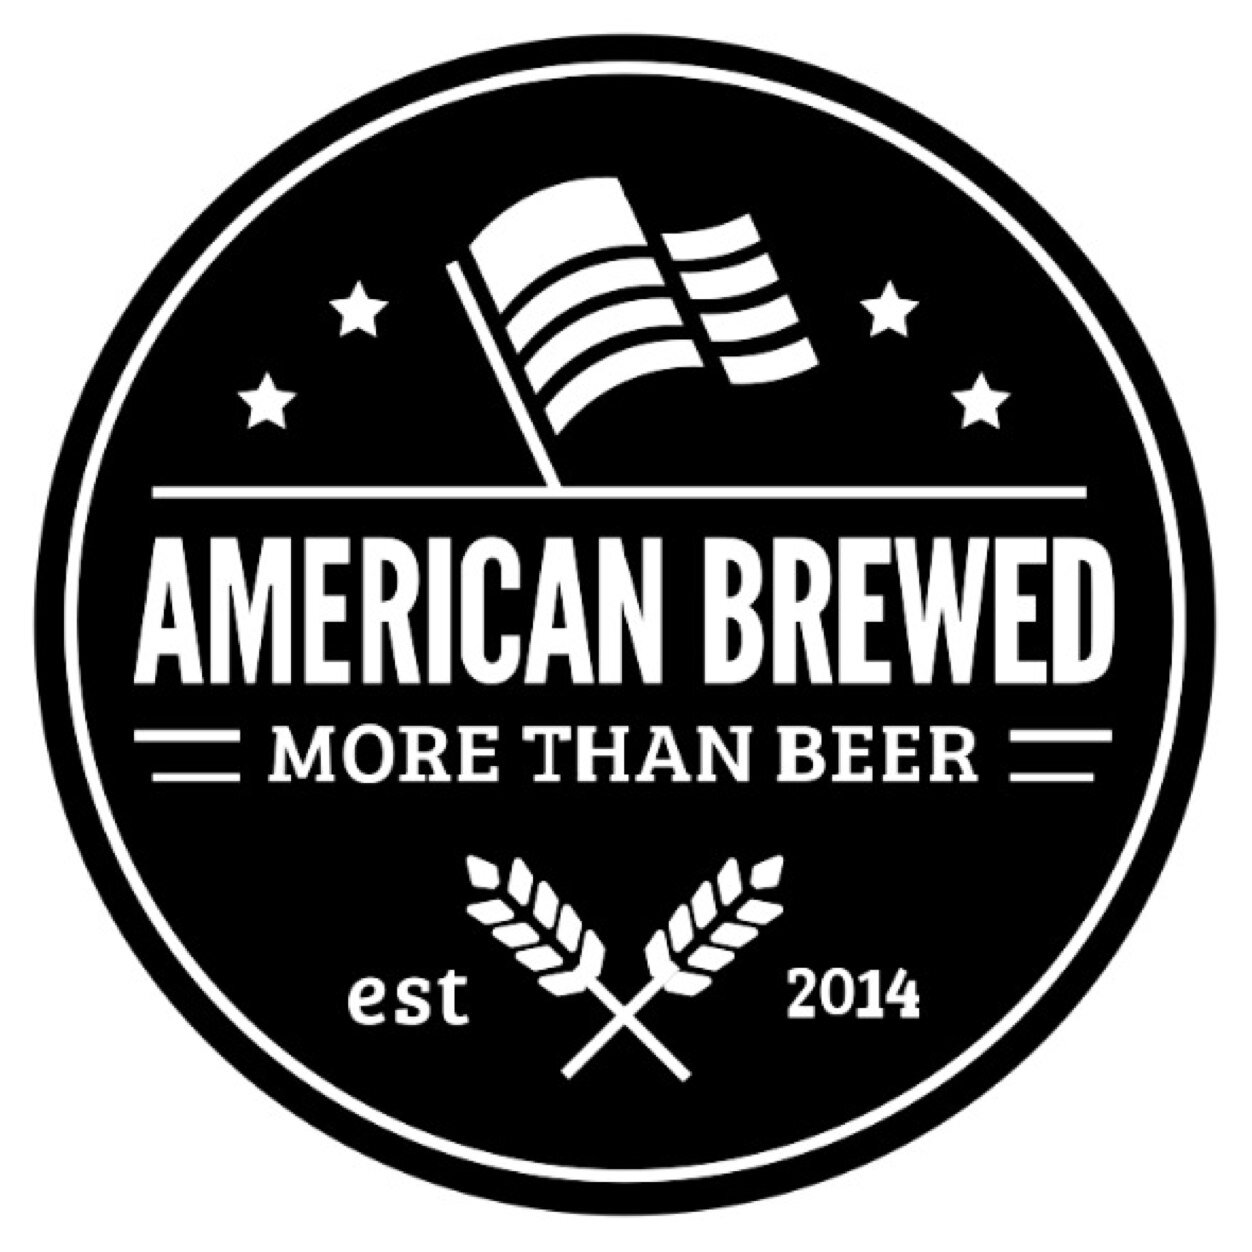 A new webseries showcasing the people behind the craft brewing world. Follow us here for all the behind the scenes action and news!